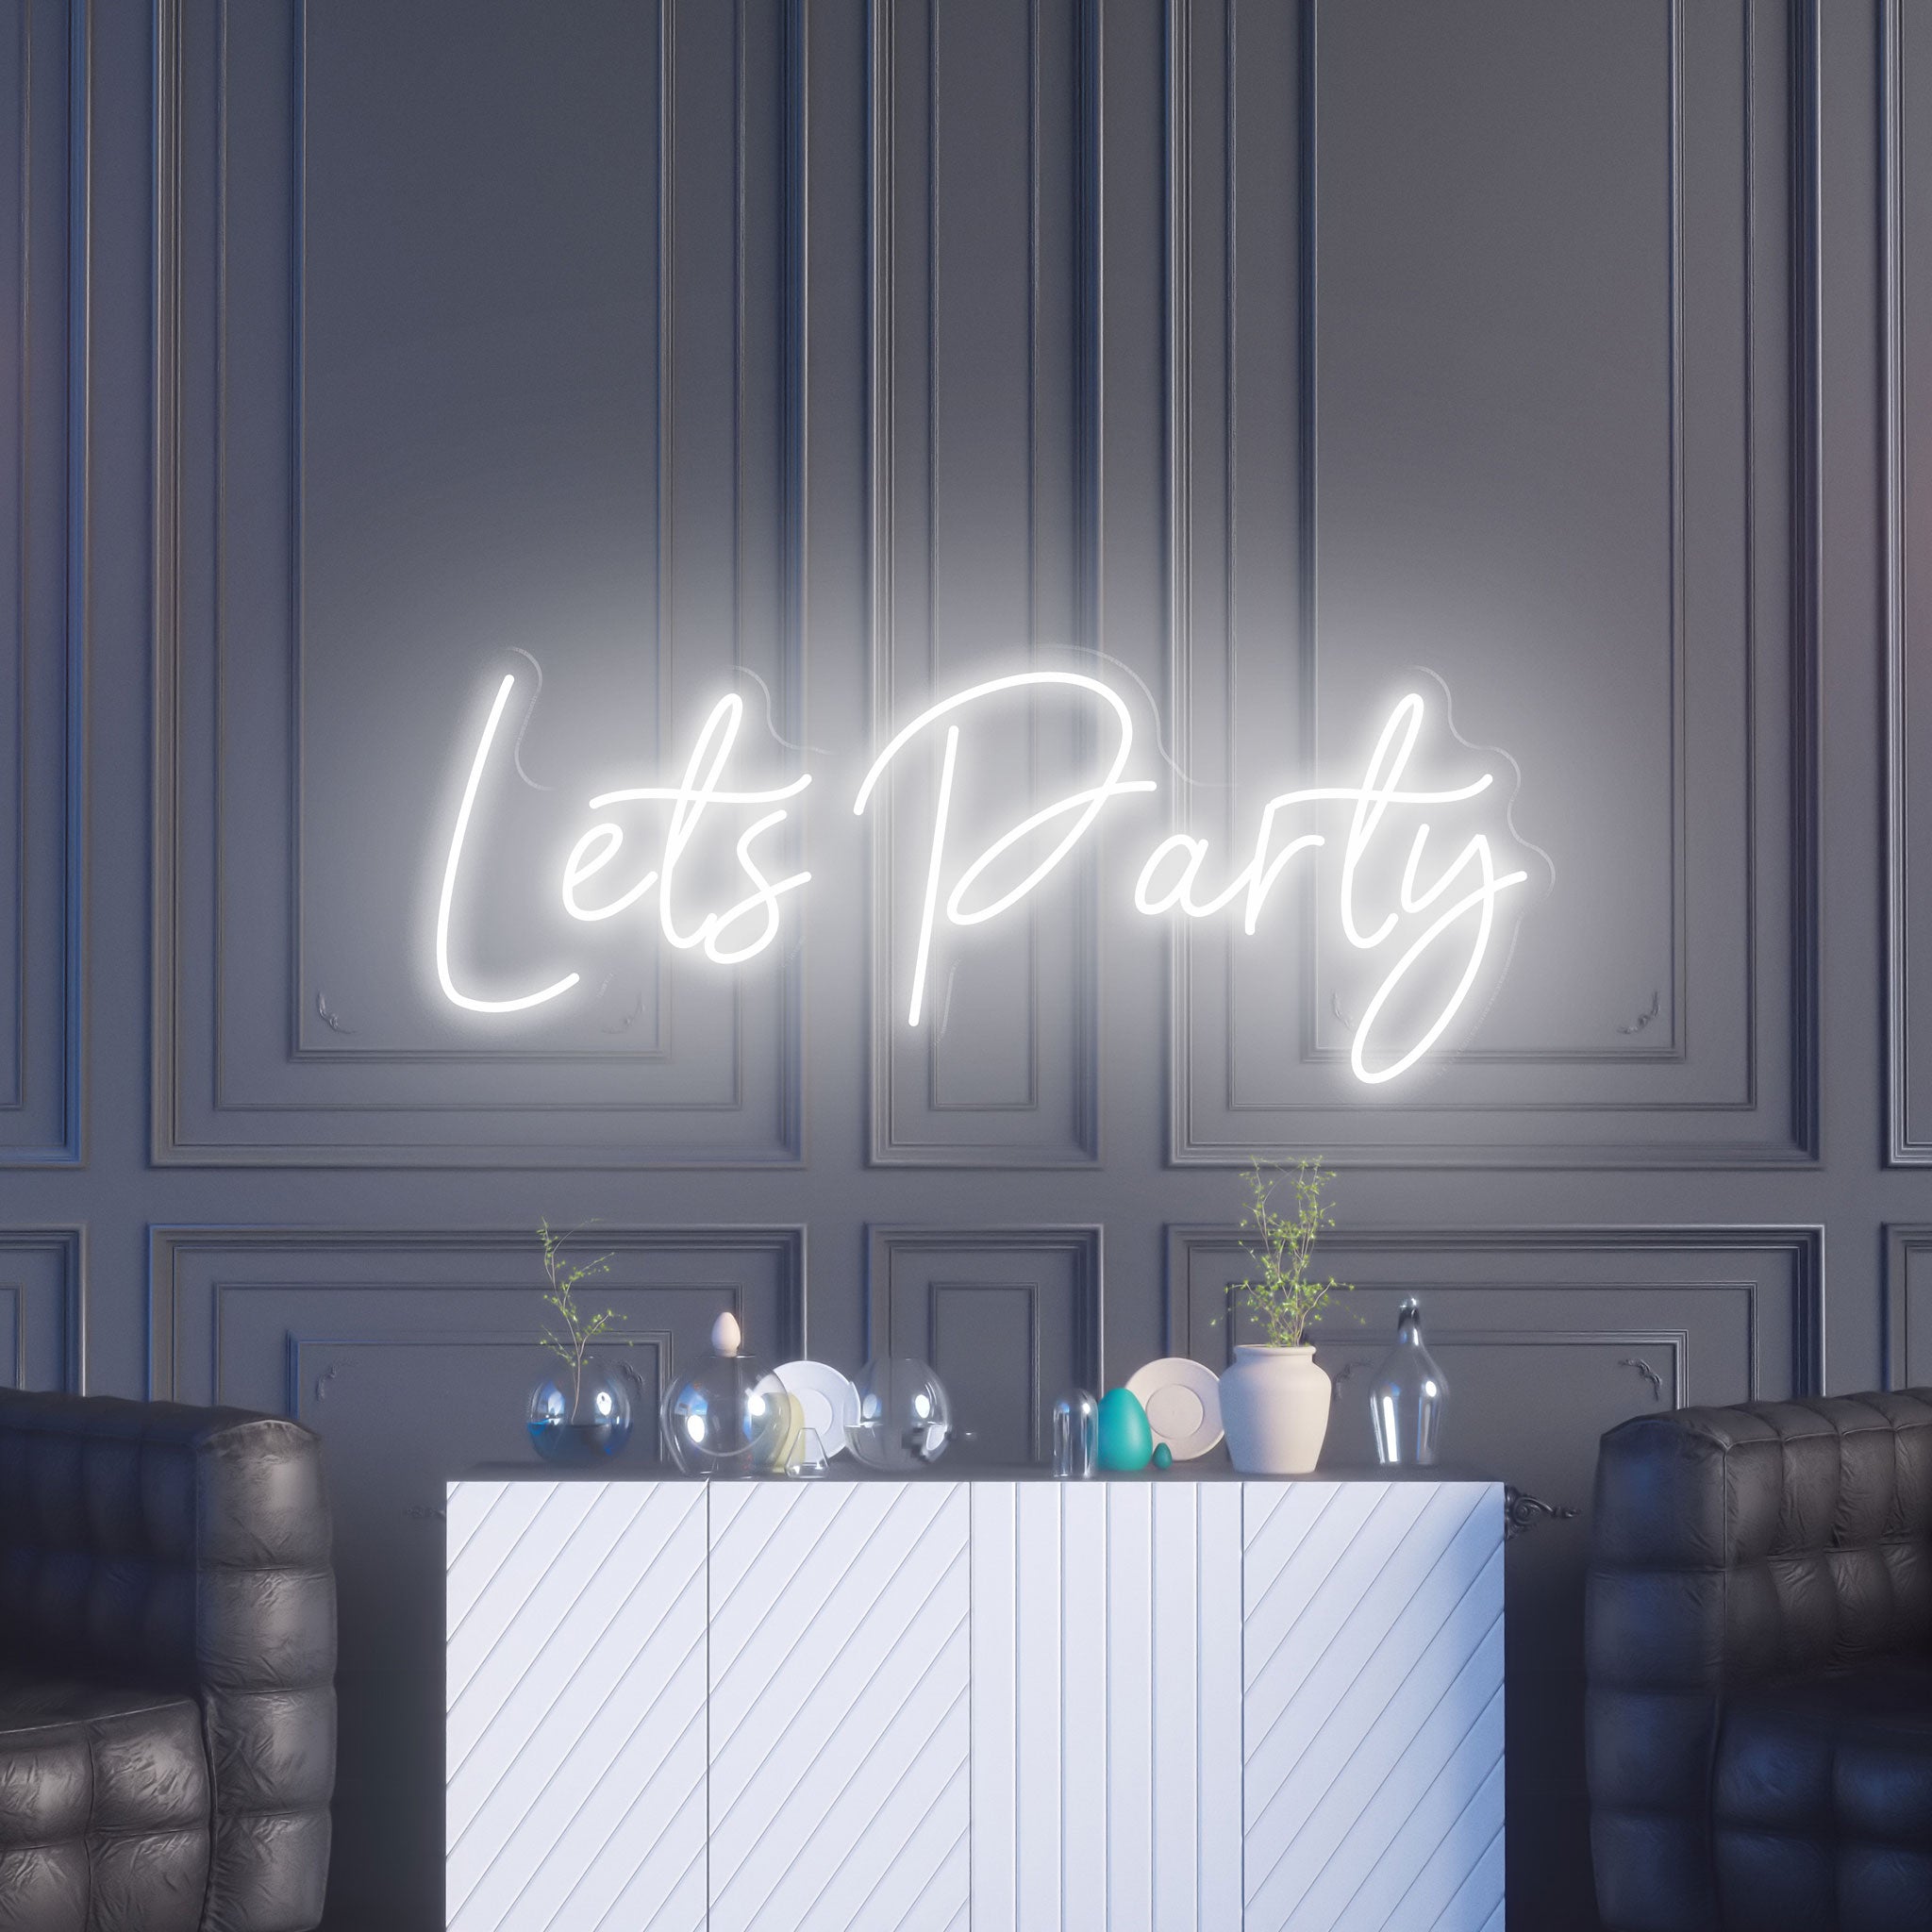 Lets Party - Neon Sign - Bar/Club/Party Celebration Event